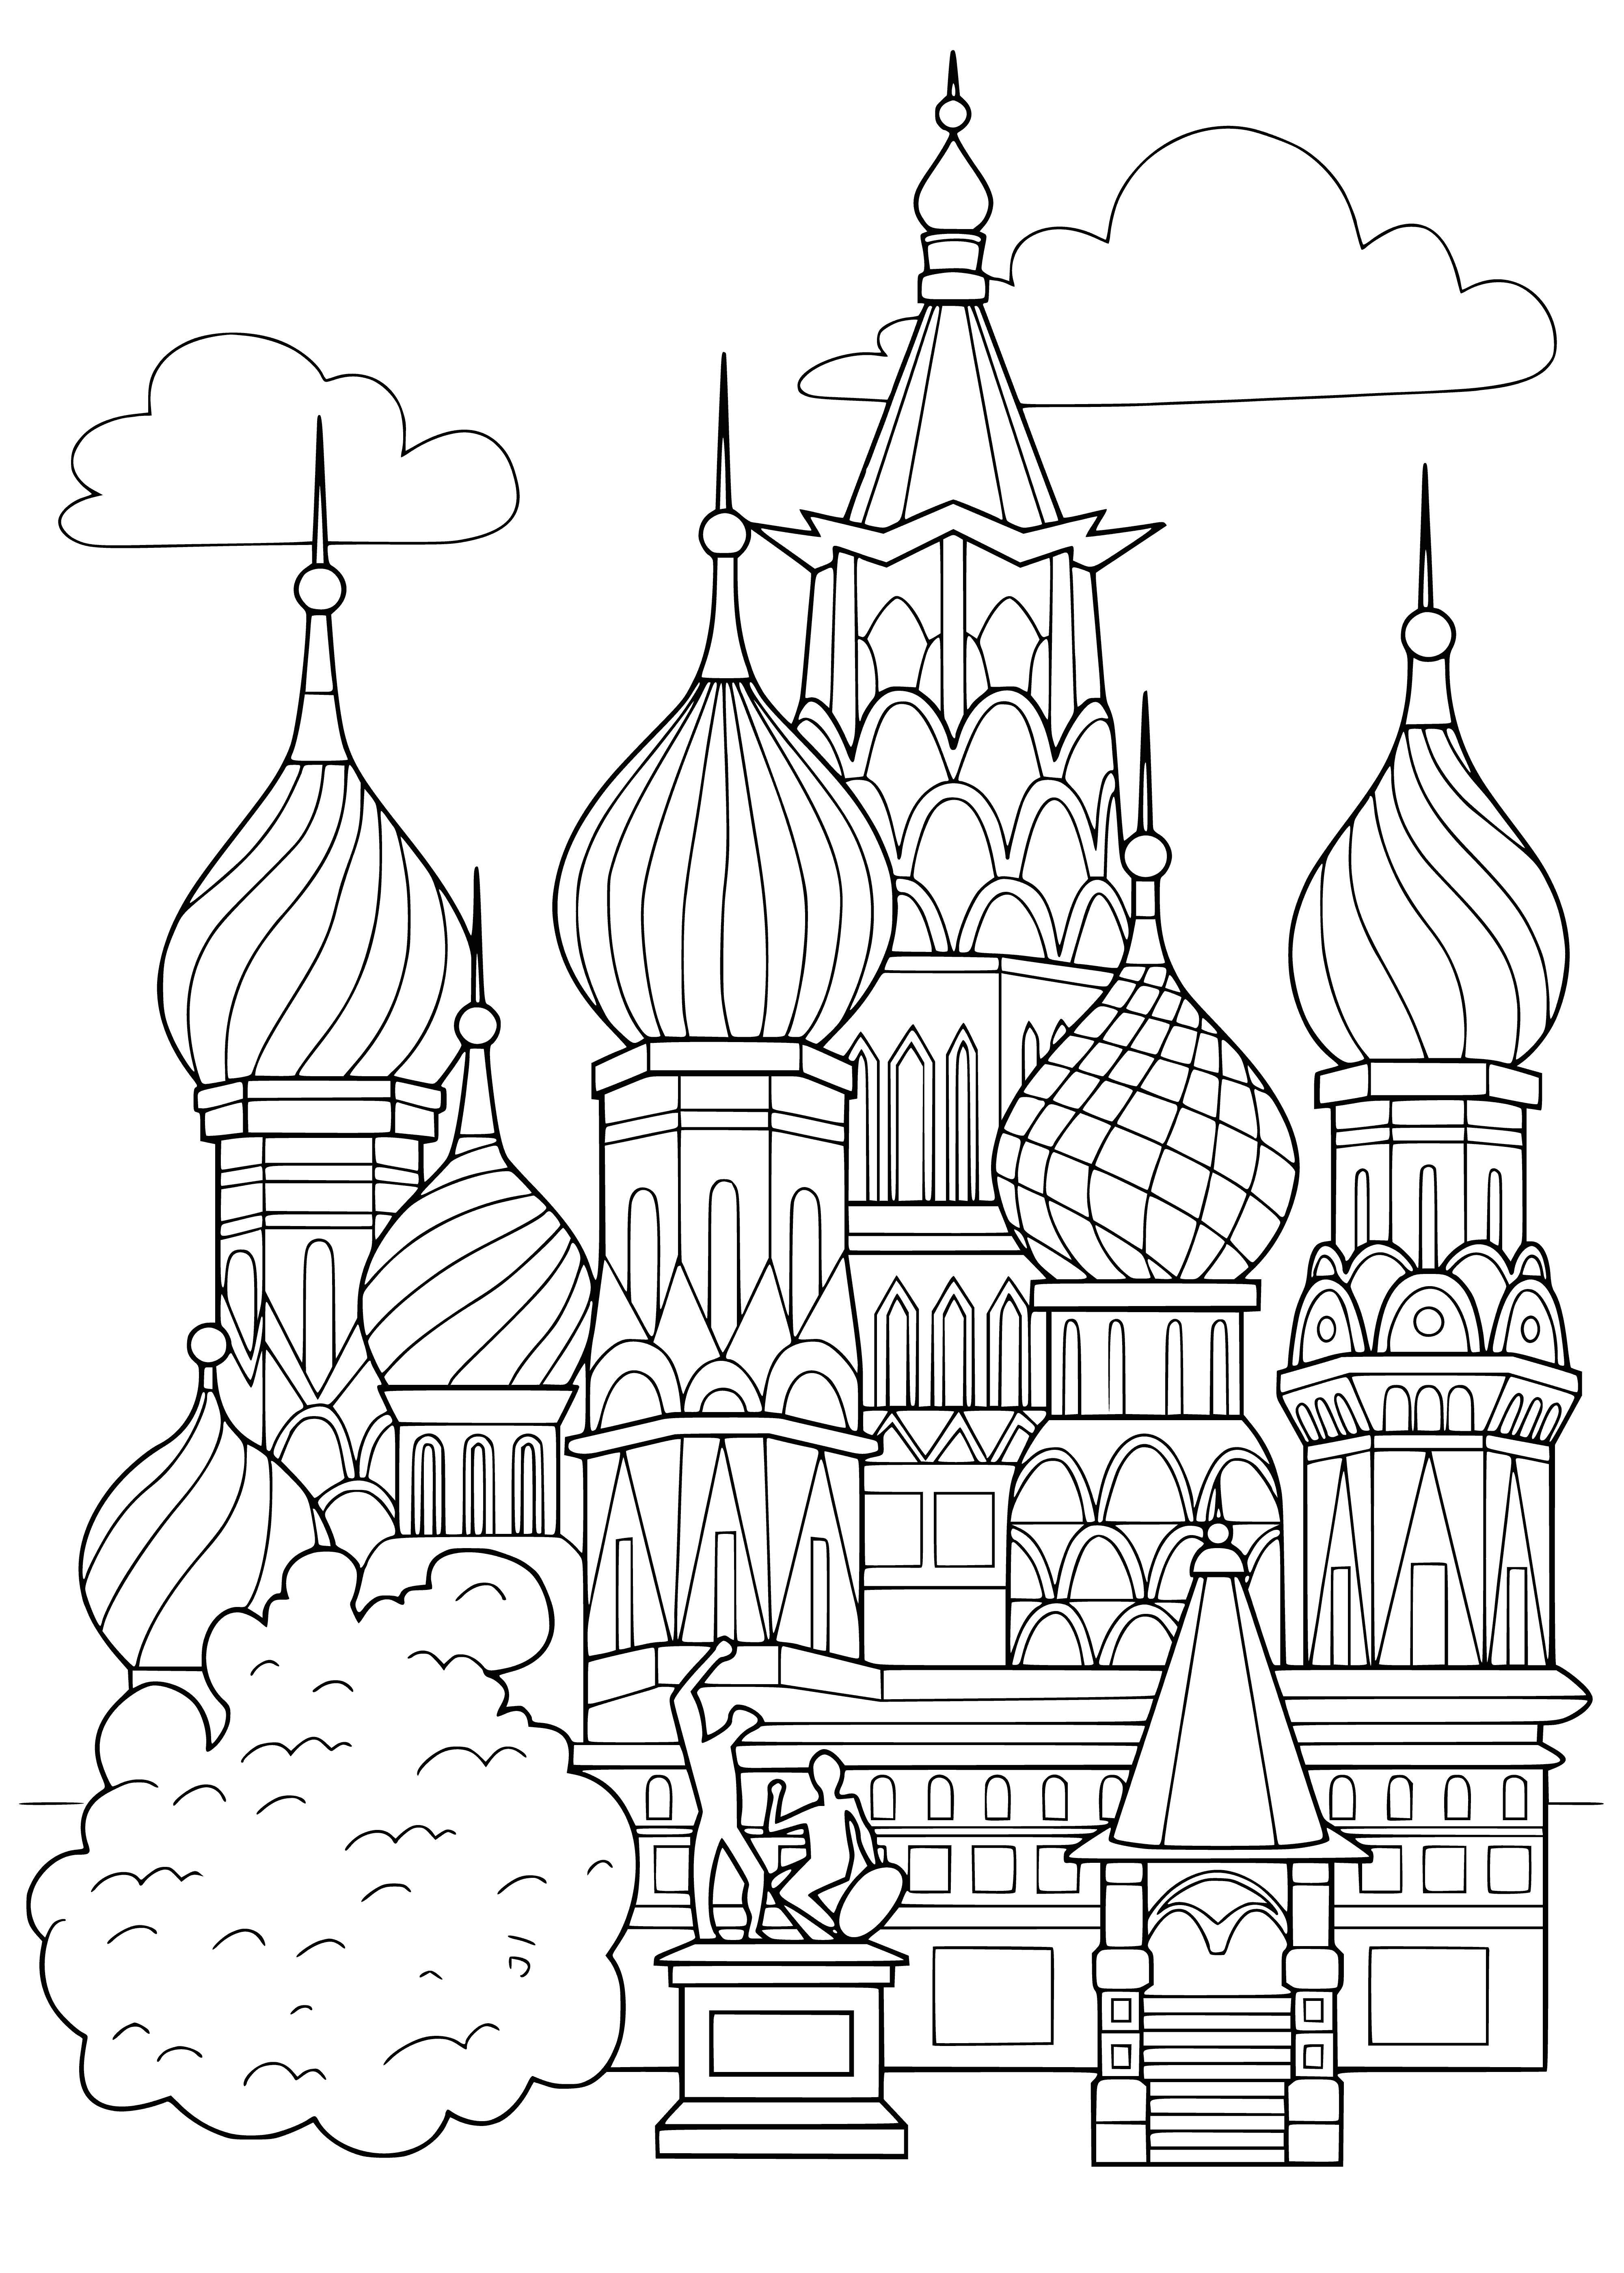 St. Basil's Cathedral in Moskou, Rusland inkleurbladsy